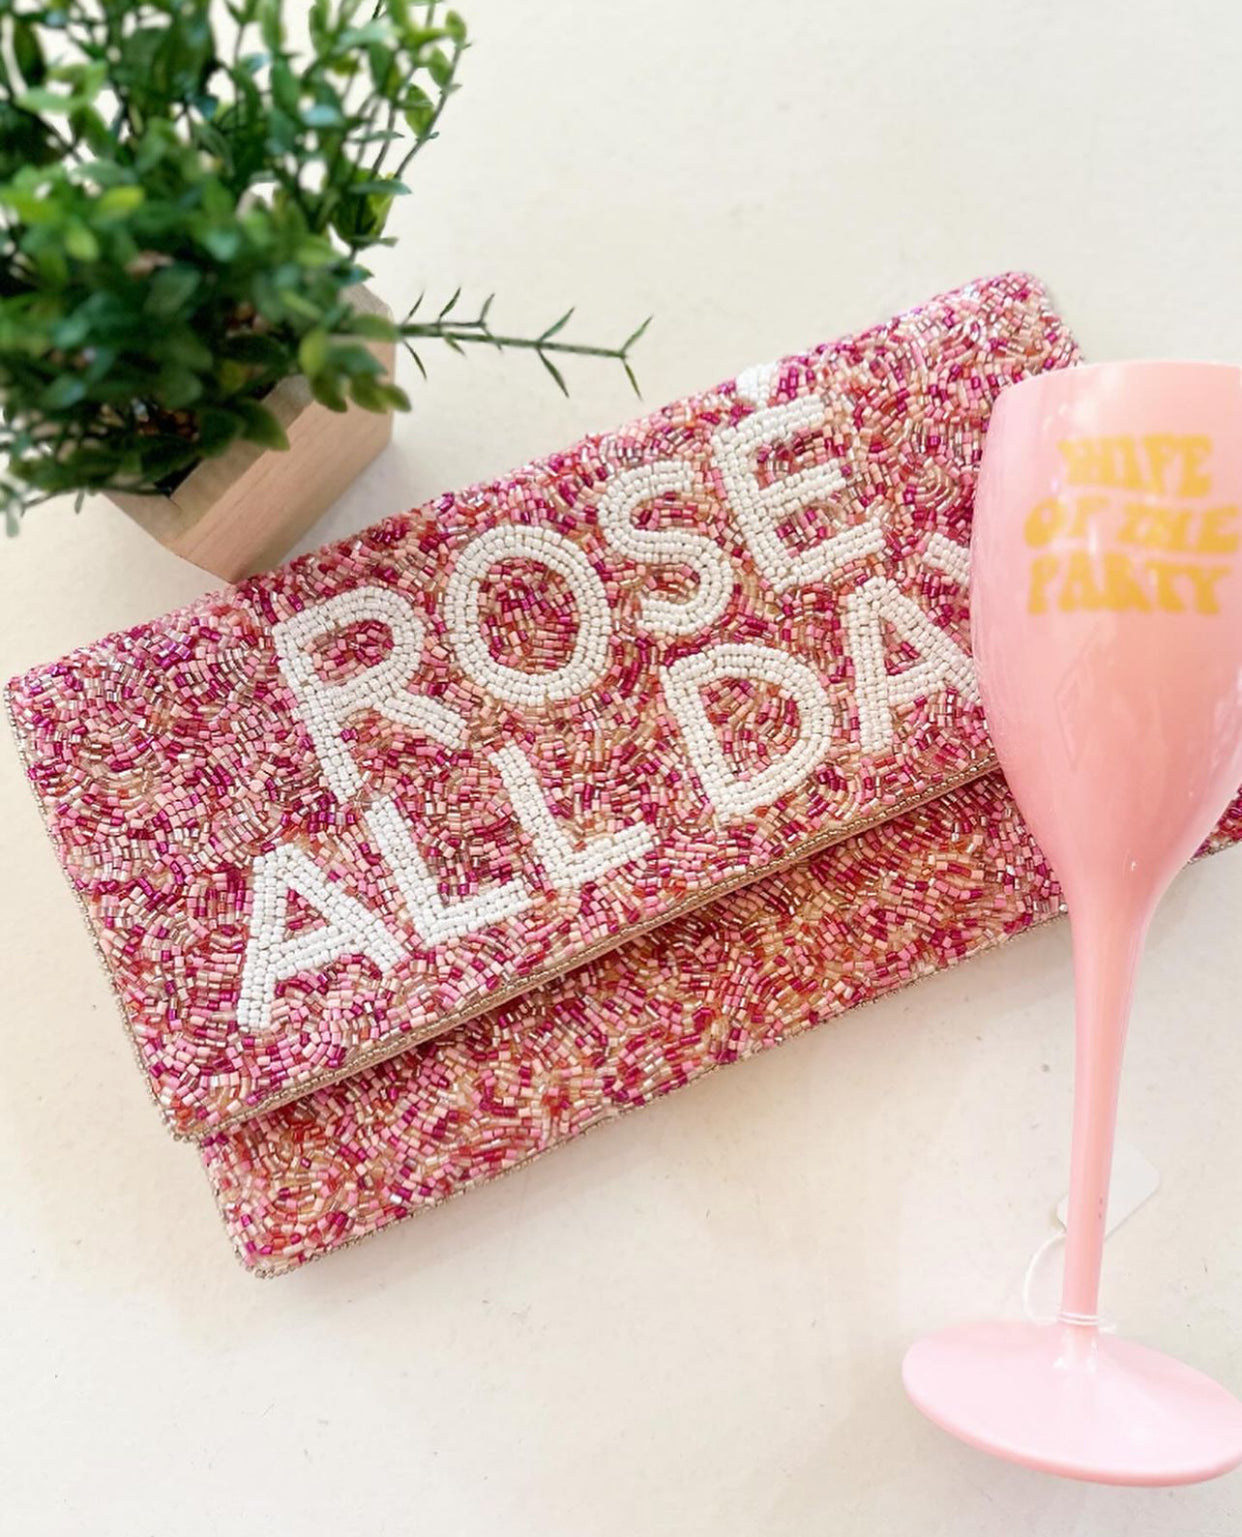 Rose All Day Pink Clutch Purse